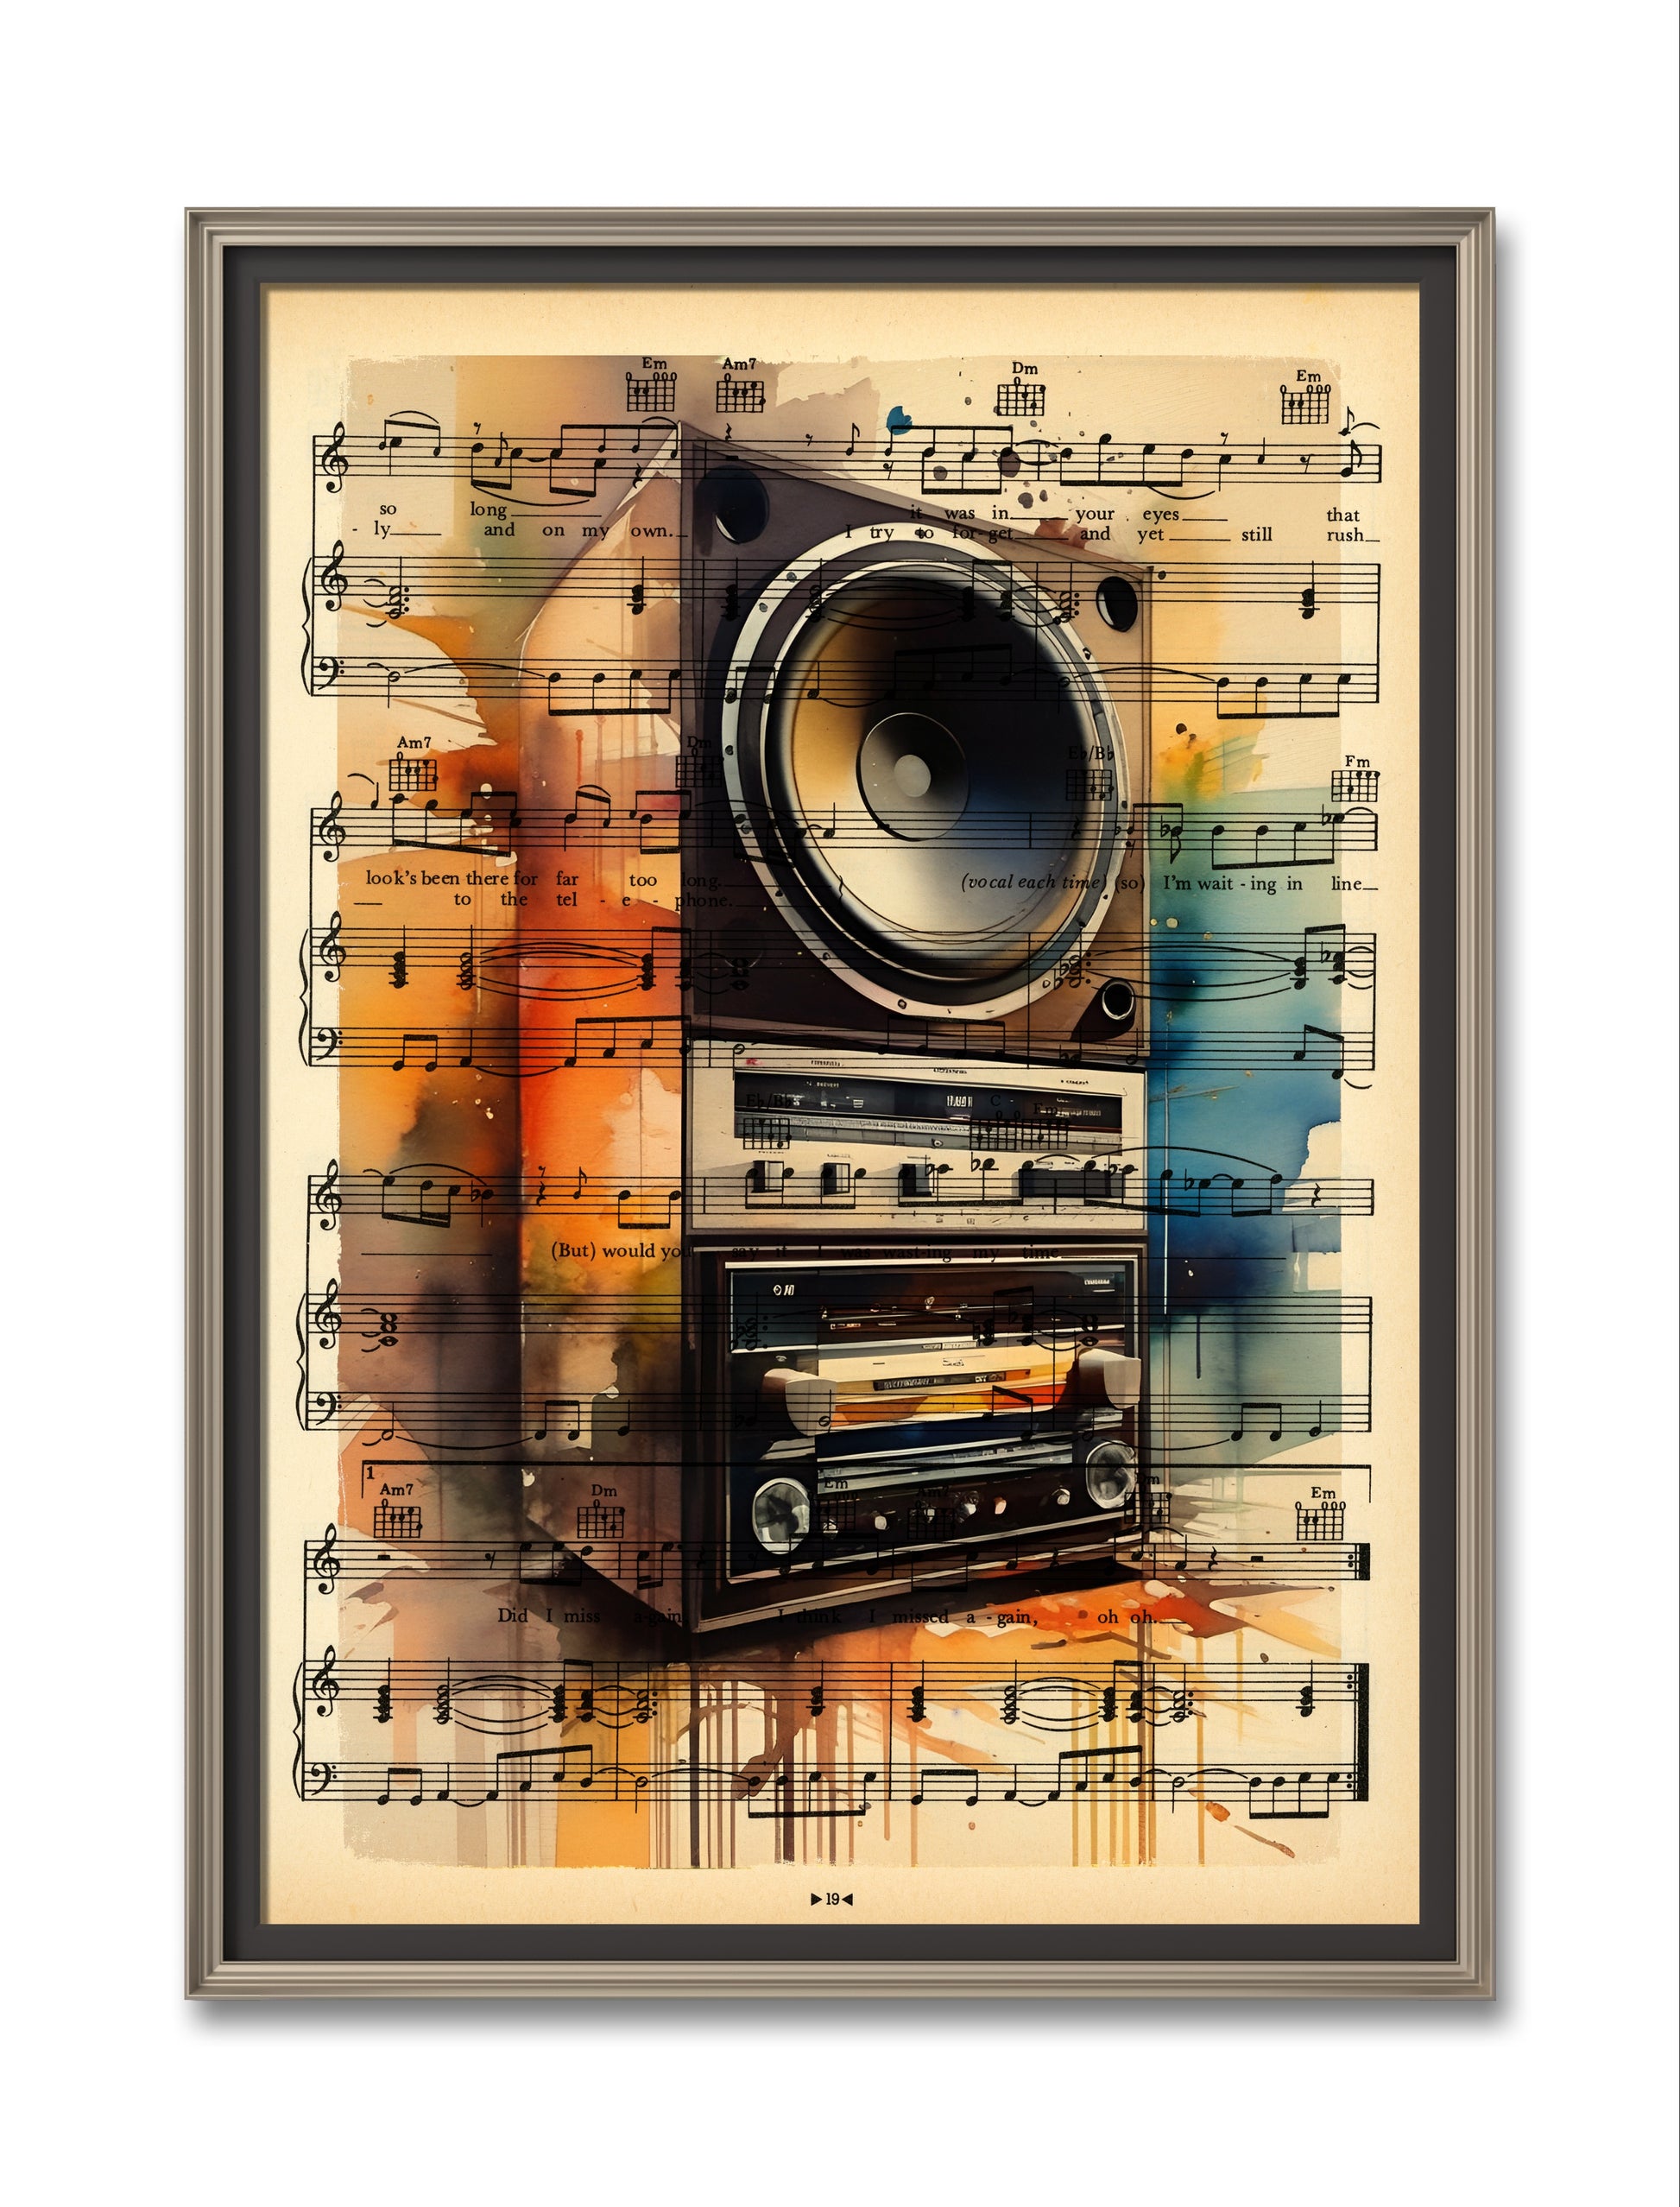 "Iconic Hits of the Eighties: Art Print on Upcycled Page"